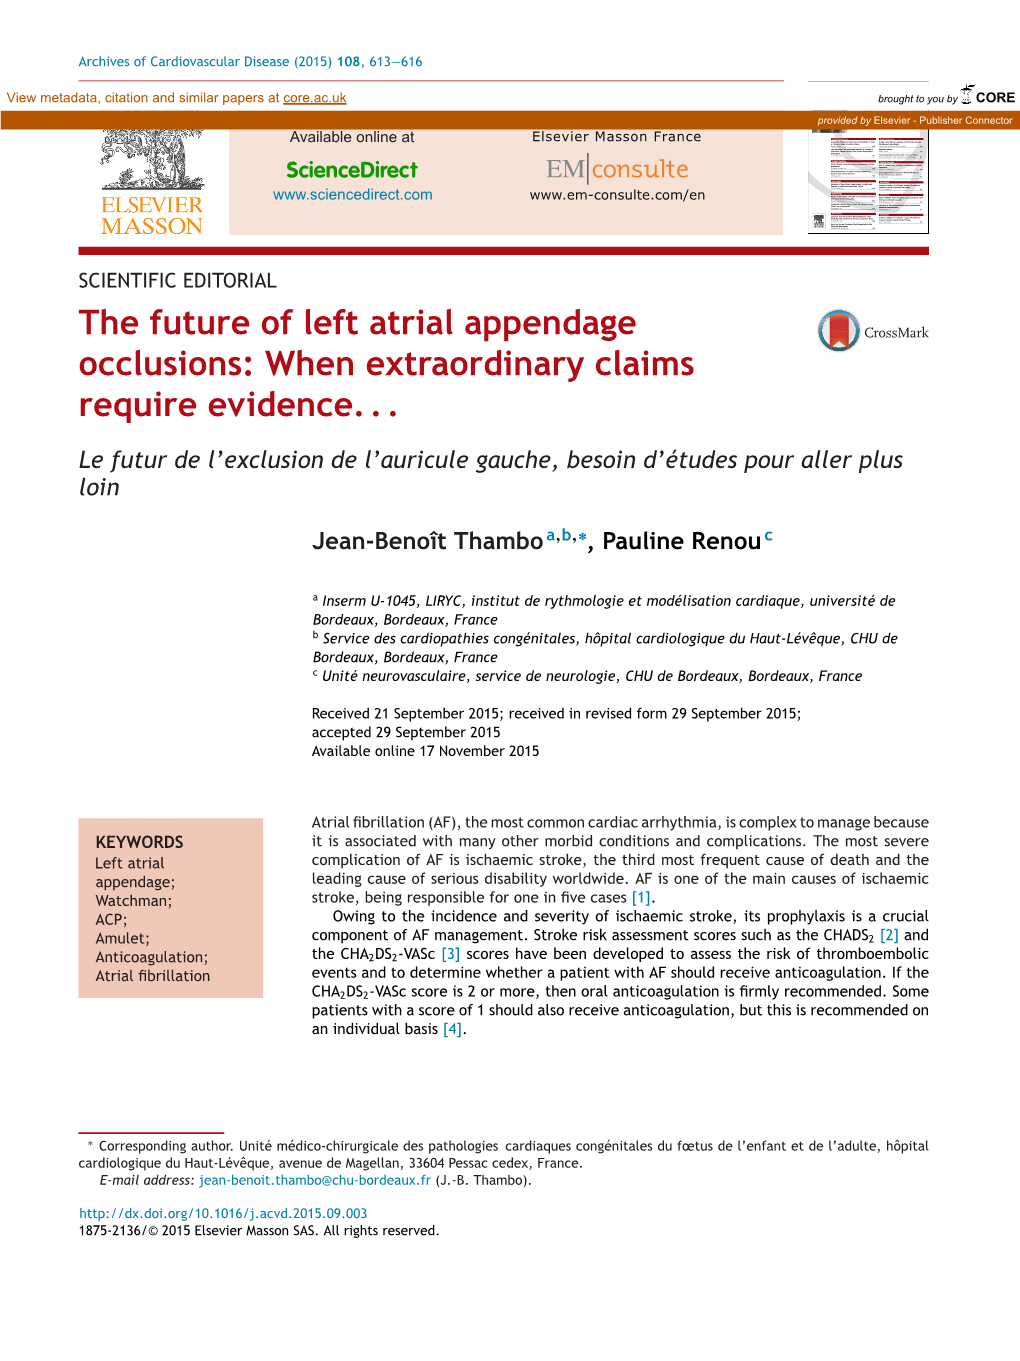 The Future of Left Atrial Appendage Occlusions: When Extraordinary Claims Require Evidence